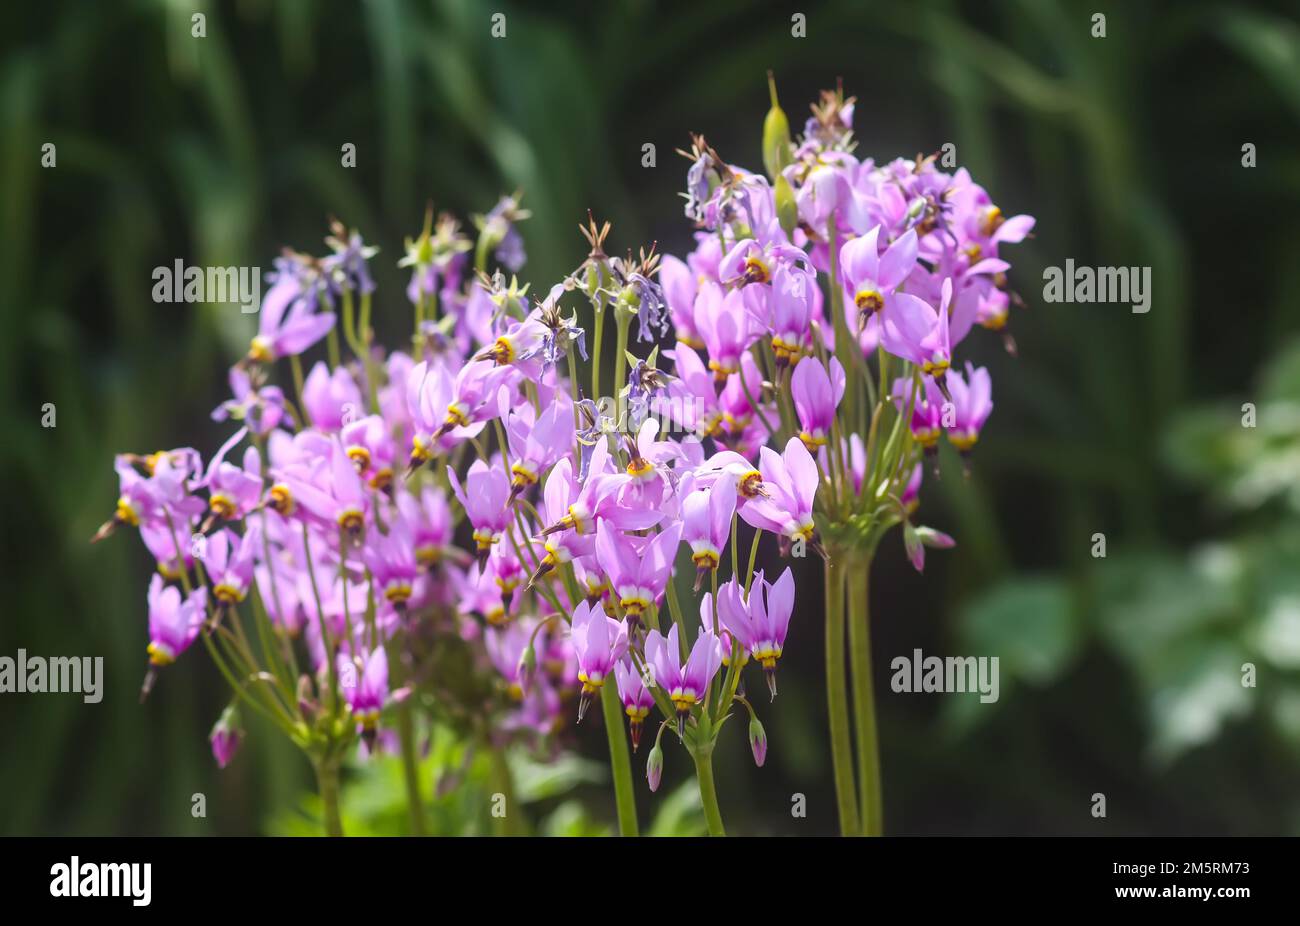 Flowers of Dodecatheon meadia plant. Primula meadia, the shooting star flowers. Stock Photo